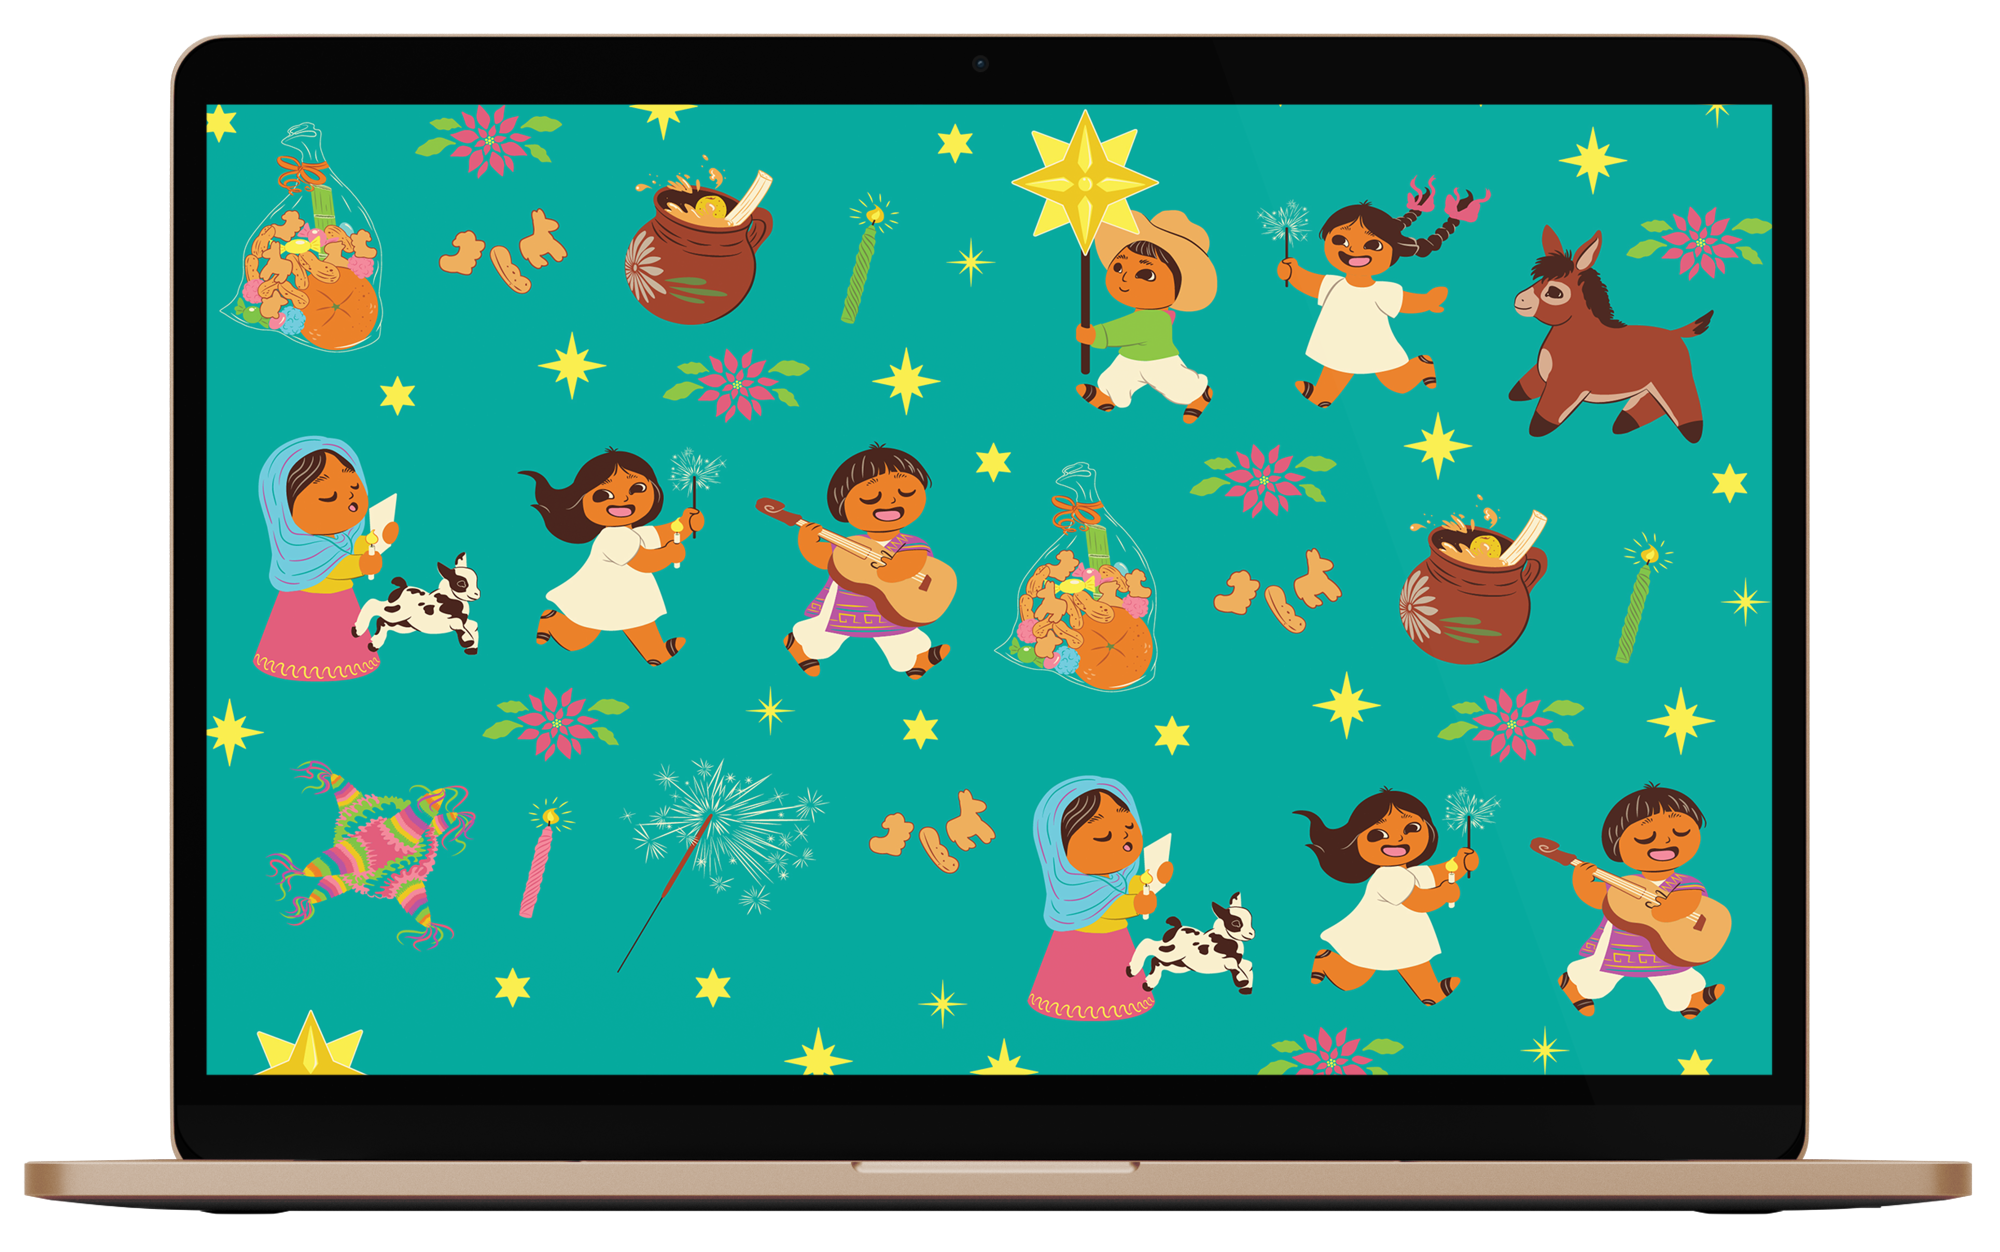 Wallpaper on a laptop of Christmas parade in Mexico, where children go door-to-door asking for small presents.